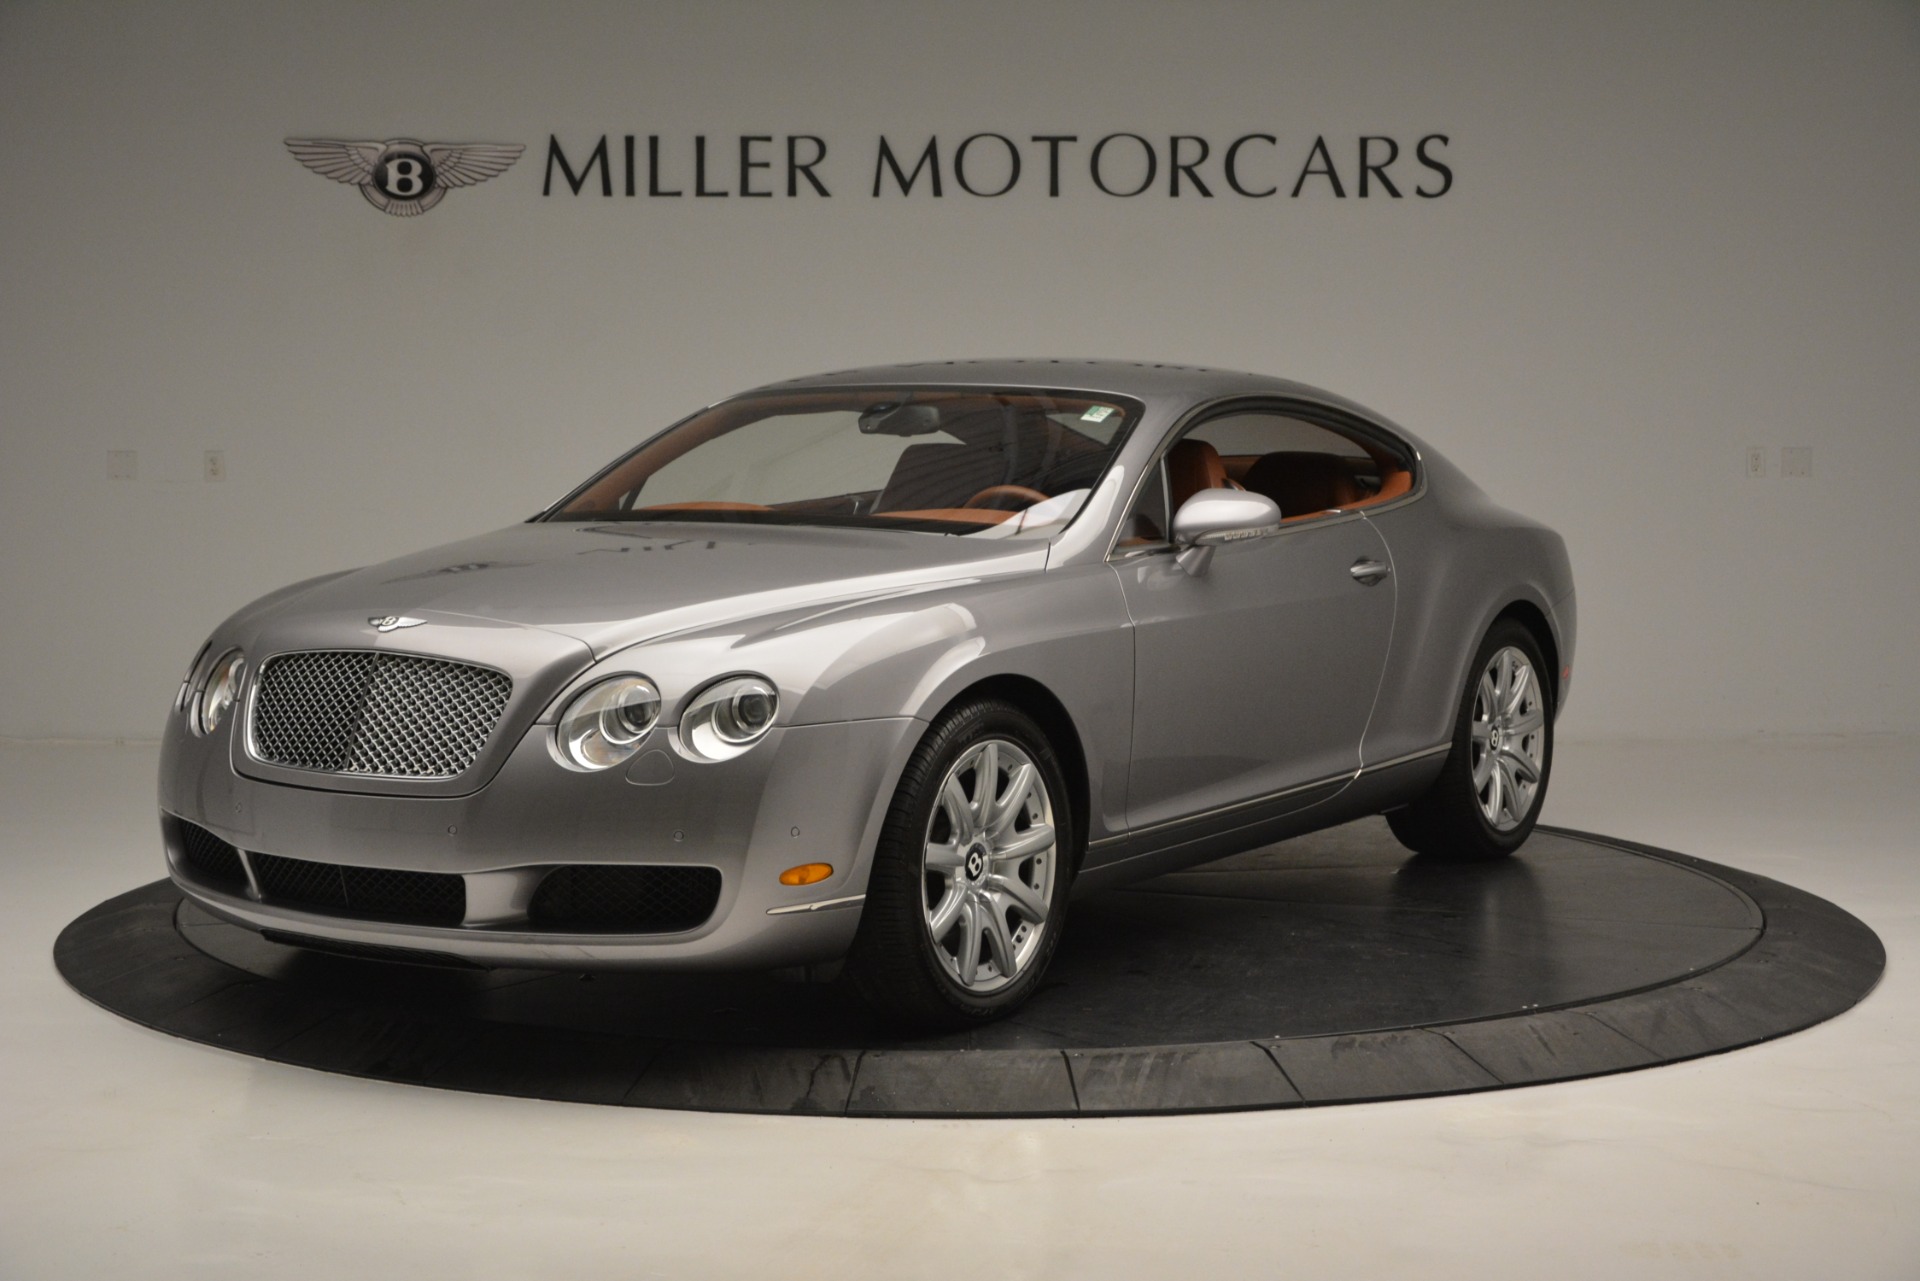 Used 2005 Bentley Continental GT GT Turbo for sale Sold at Bentley Greenwich in Greenwich CT 06830 1